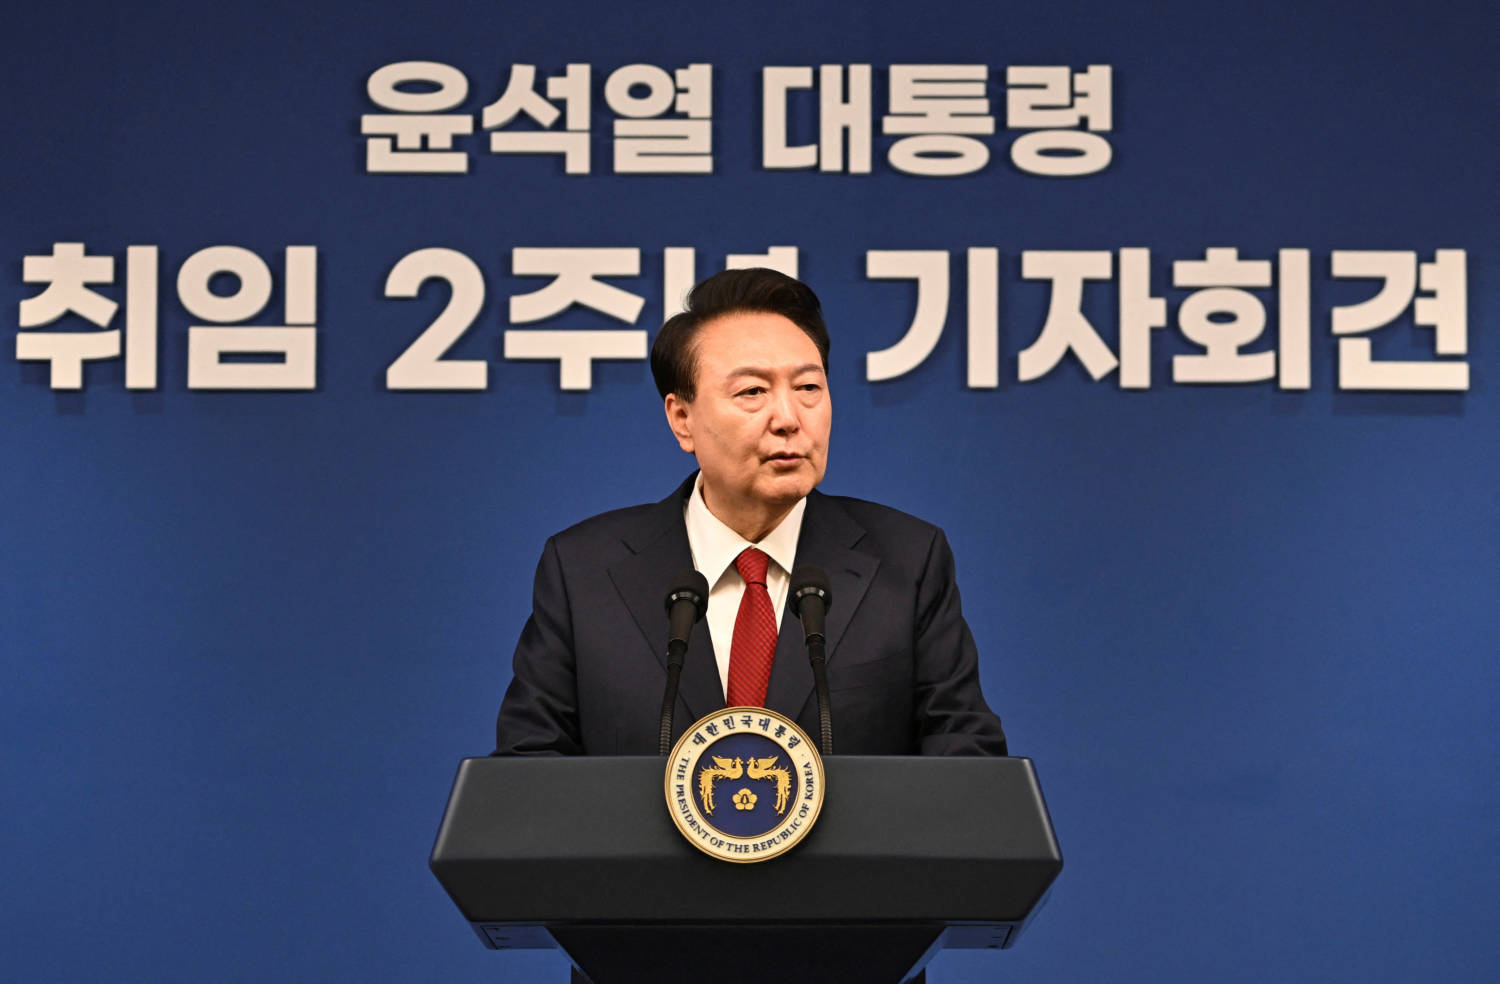 South Korean President Yoon Suk Yeol Attends A Press Conference Marking Two Years In Office, In Seoul